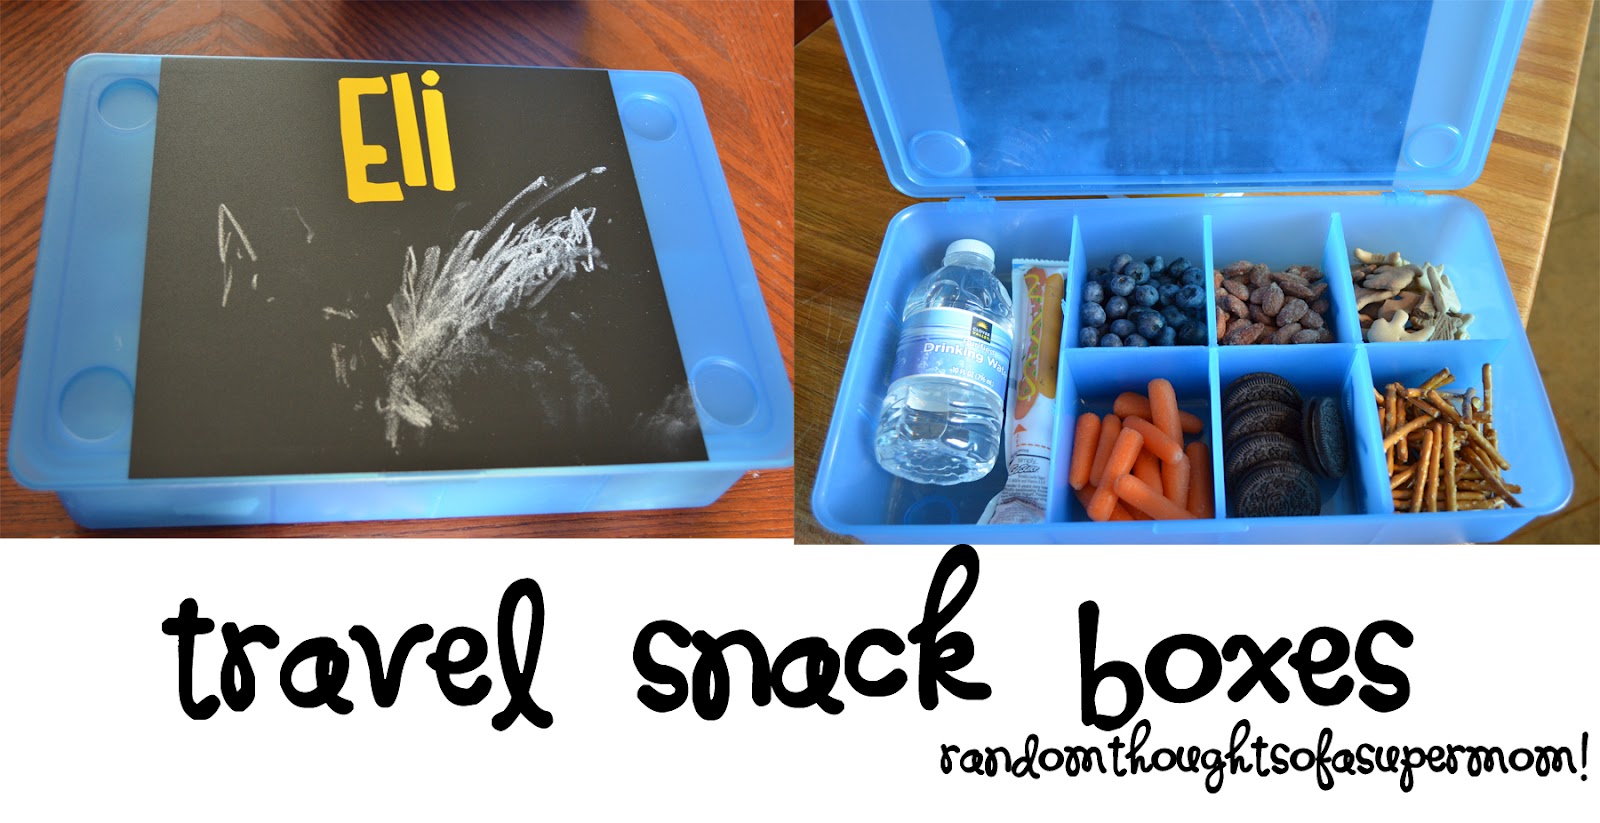 Random Thoughts of a SUPERMOM!*: Roadtrip Ready: Travel Snack Boxes